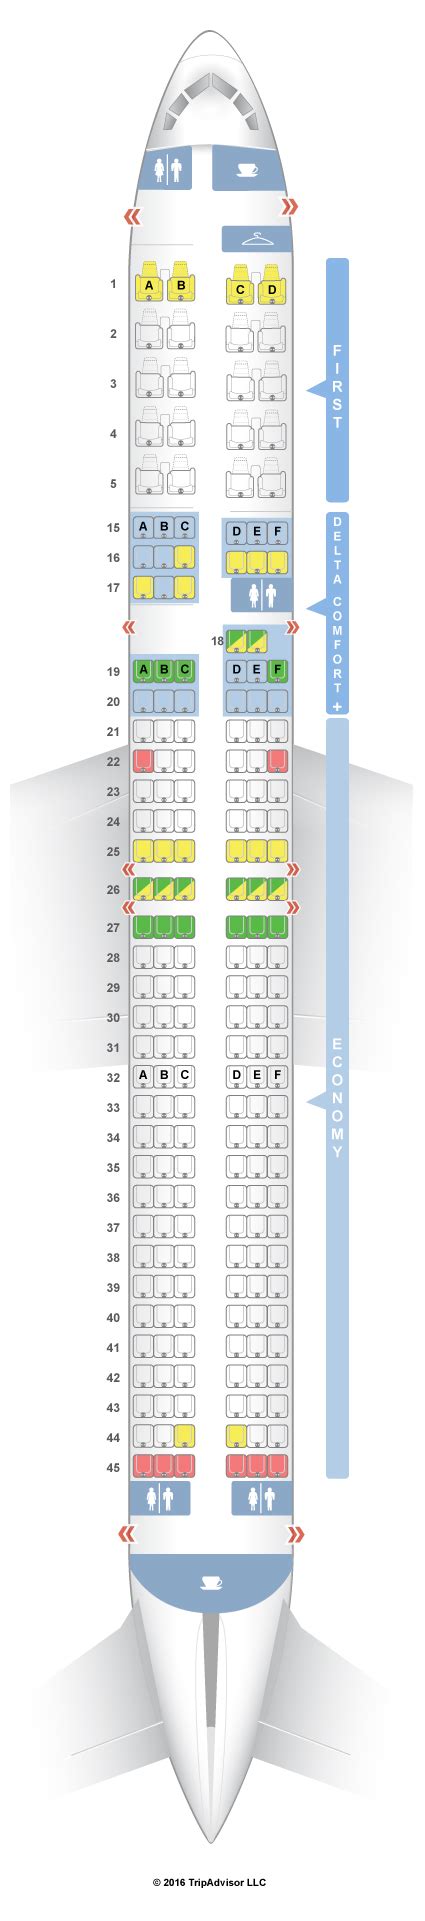 delta airlines boeing 757 seating chart